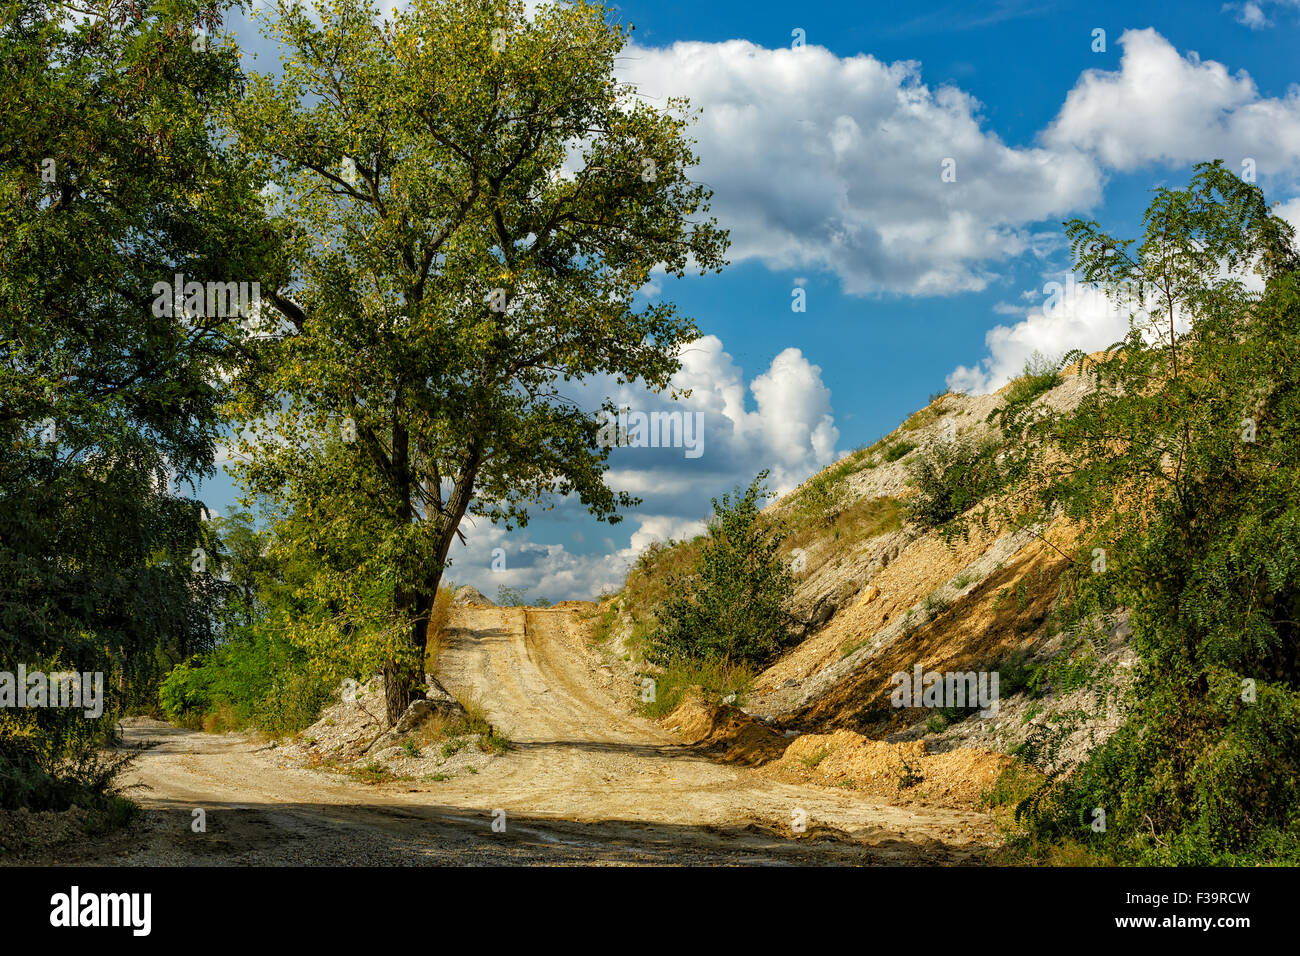 Devastation of the country. Gravel extraction at river Danube. Stock Photo